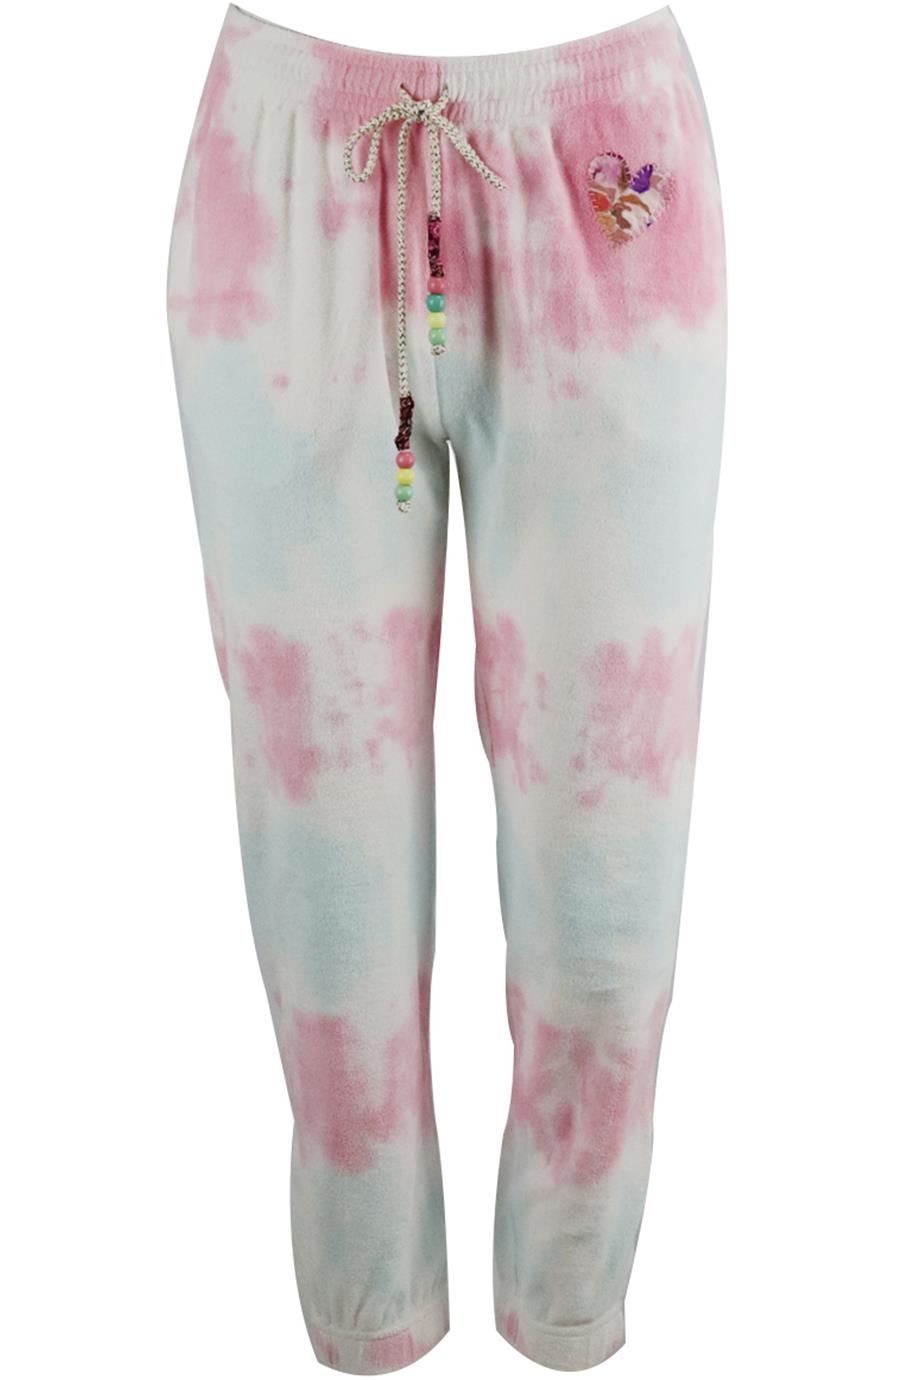 LOVESHACKFANCY TIE DYED COTTON TERRY TRACK PANTS SMALL